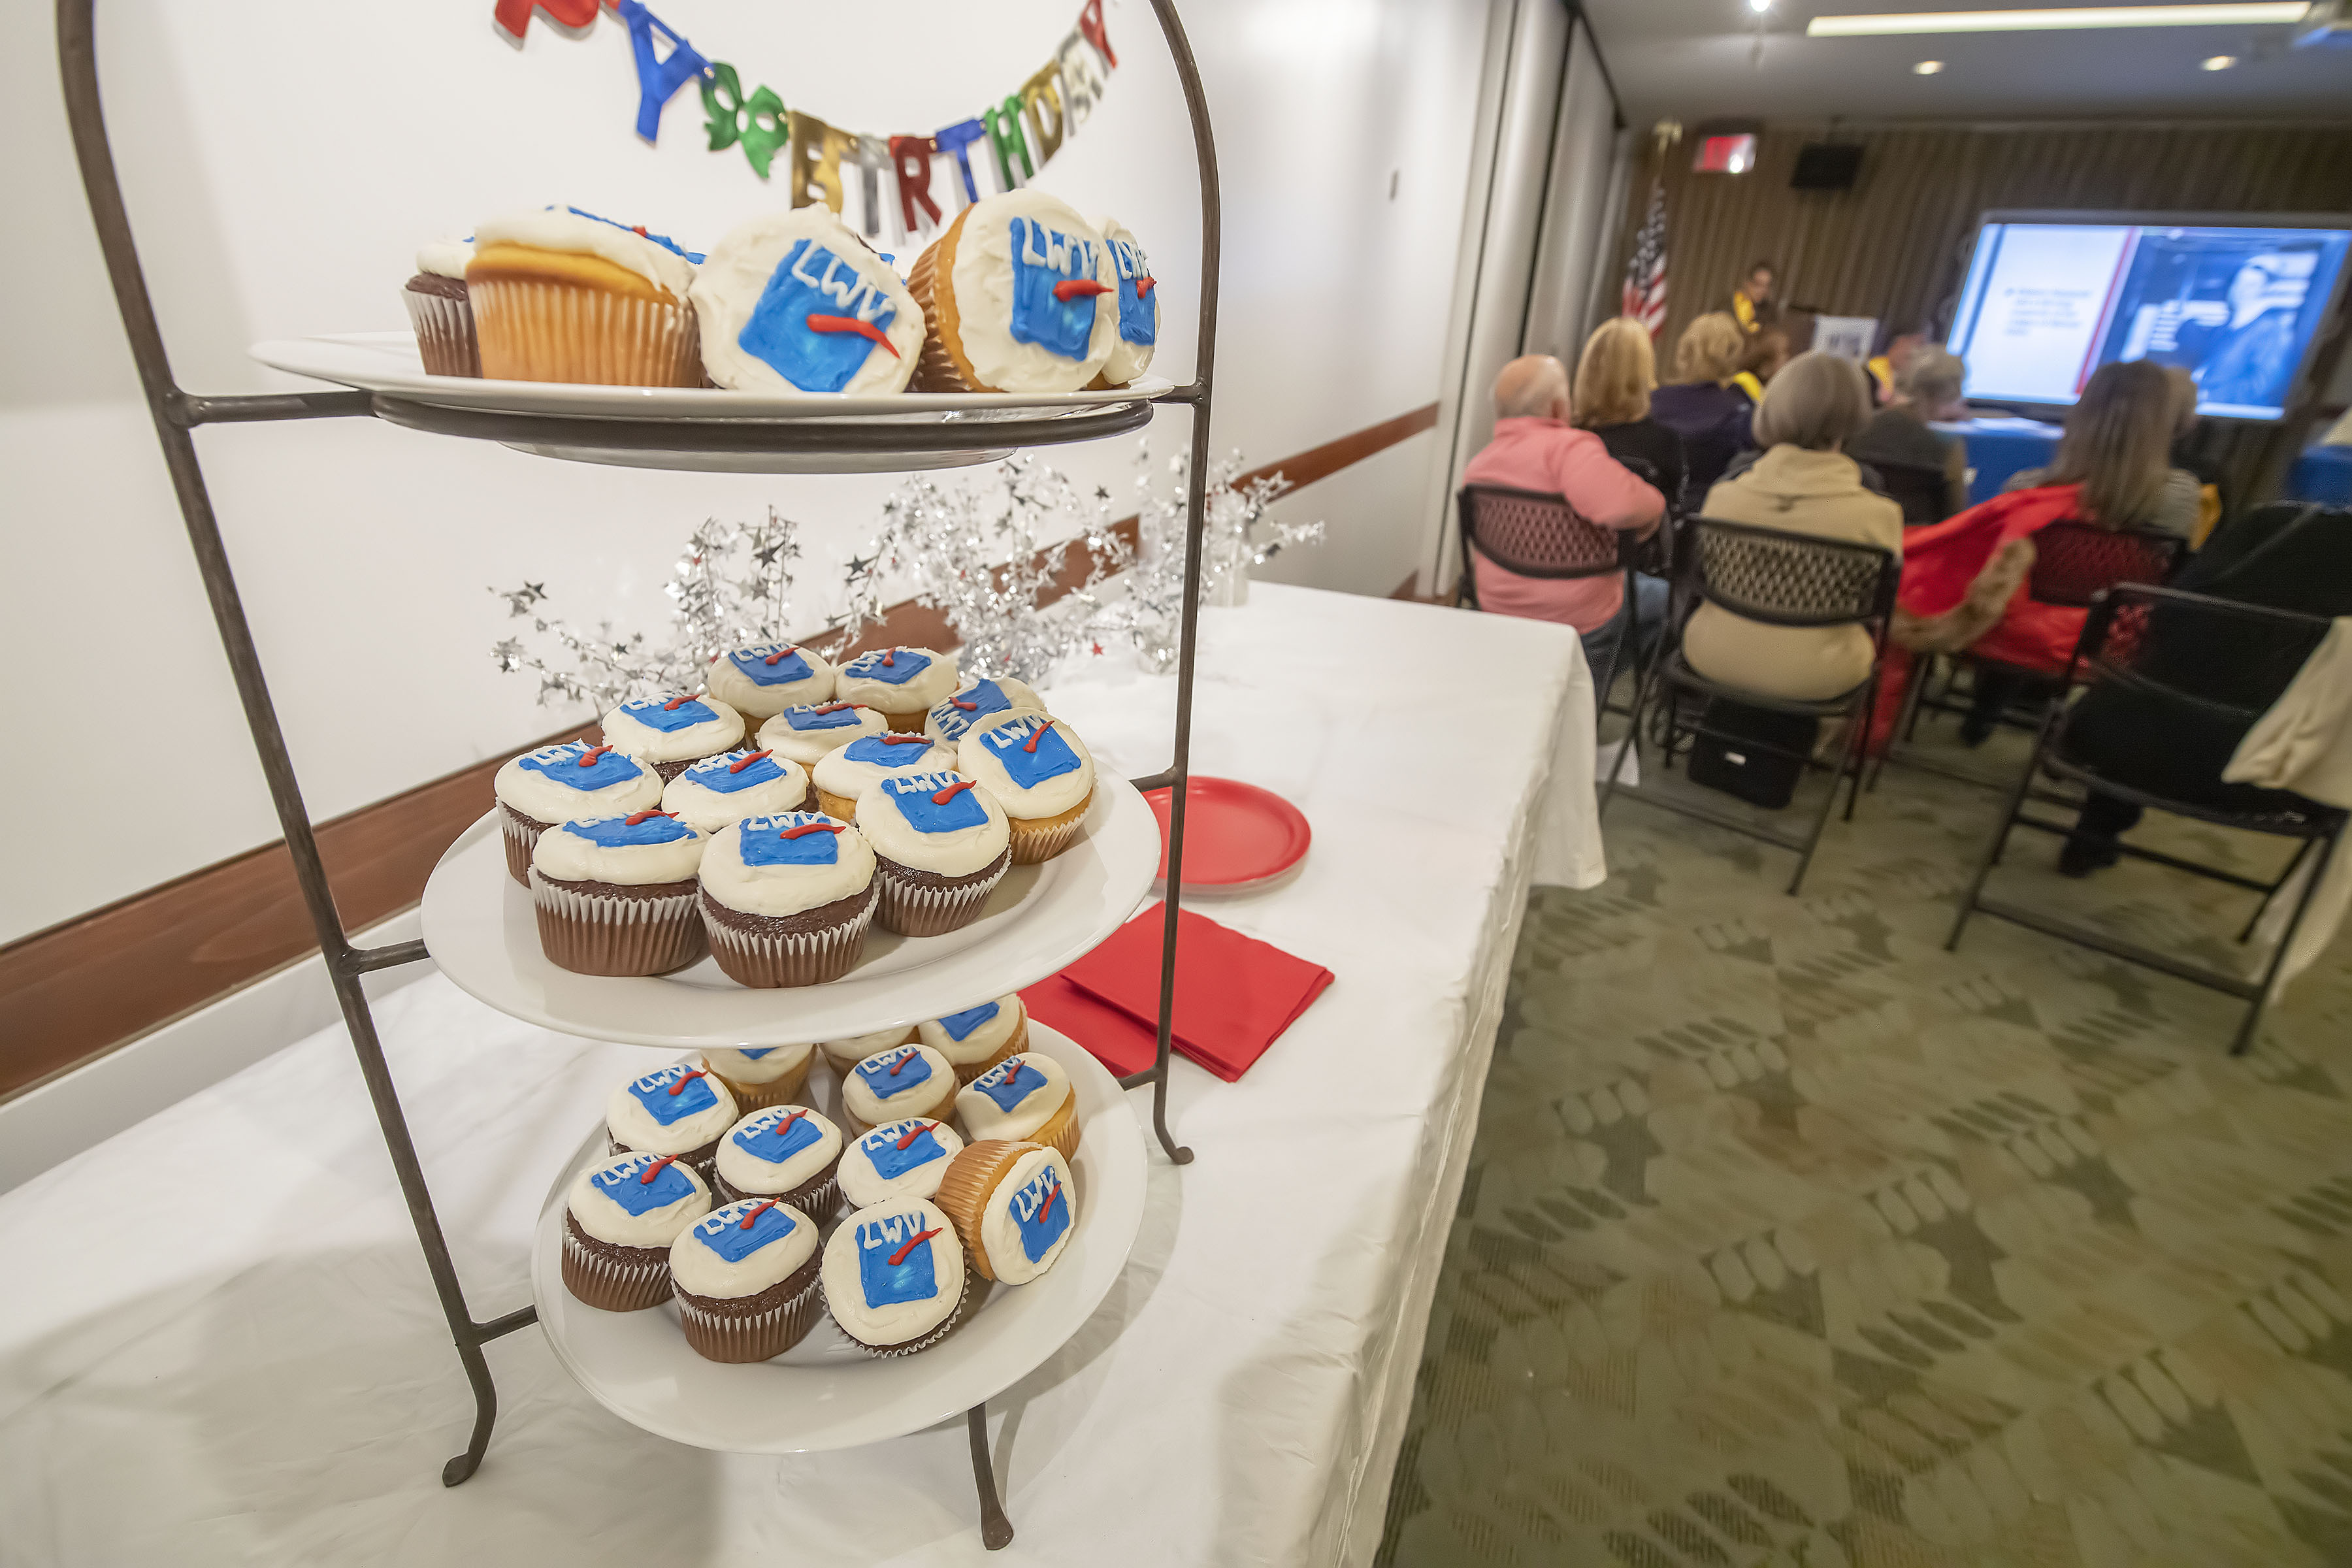 Special cupcakes during a gathering to celebrate of the 100th Anniversary of the League of Women Voters.